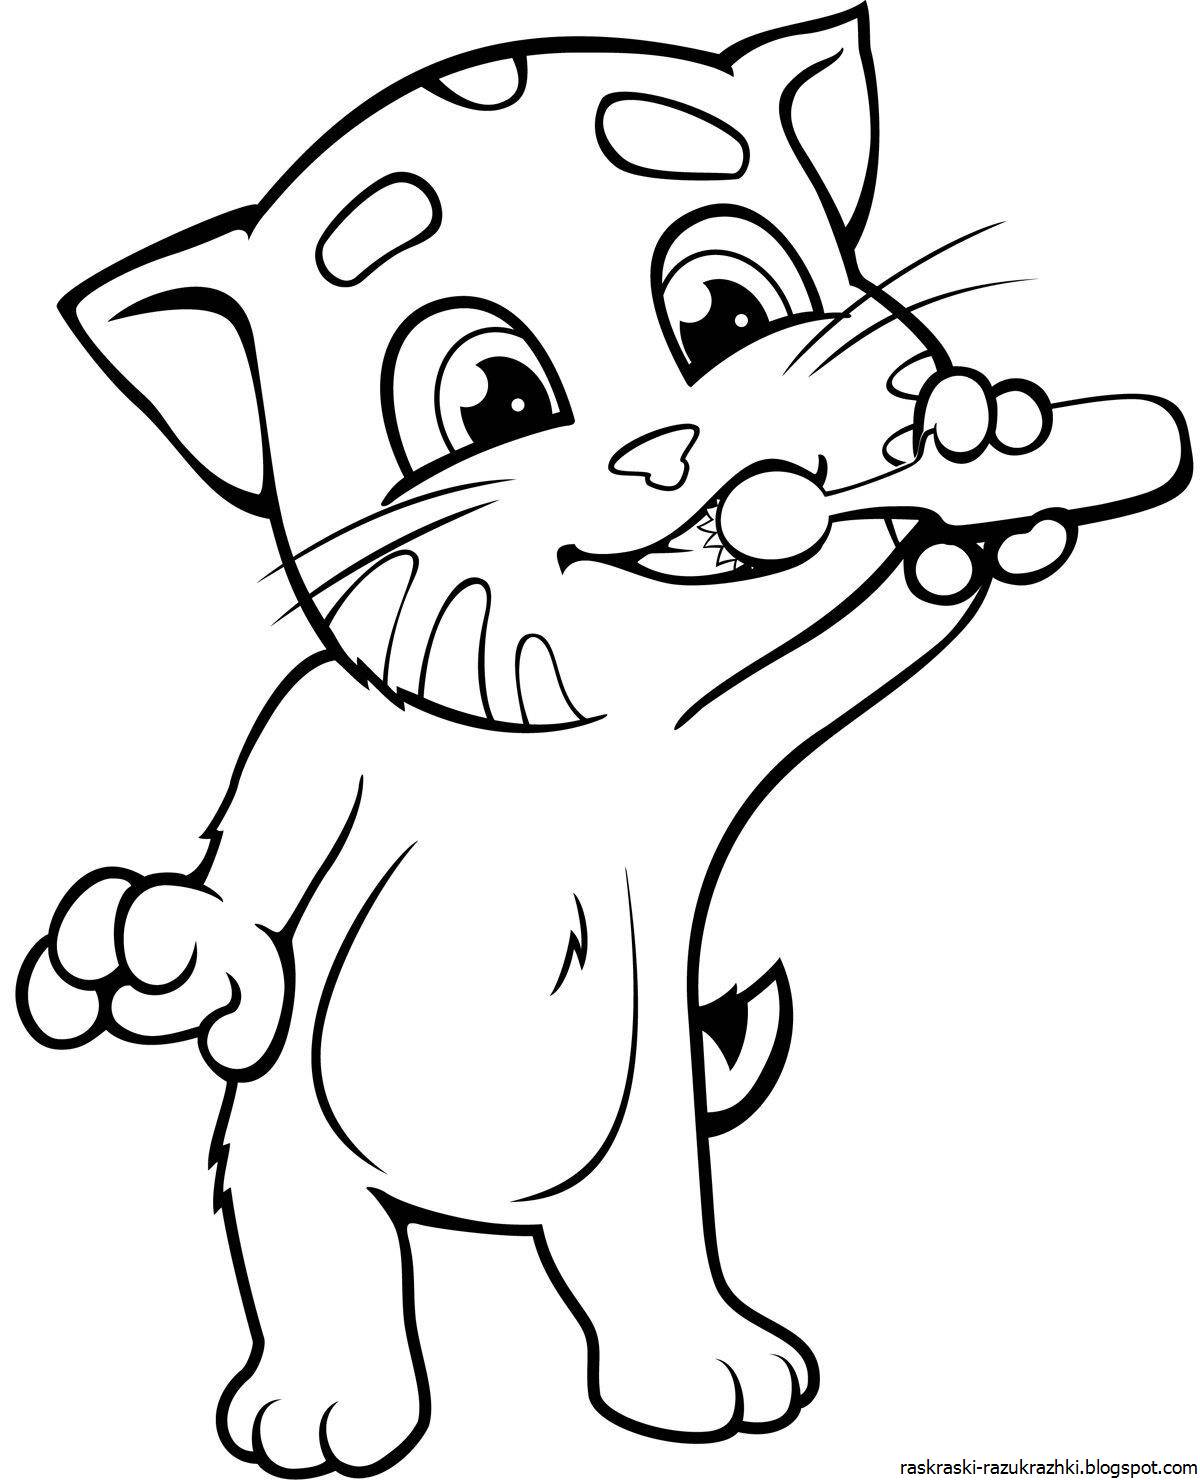 Tom's cat's colorful coloring page